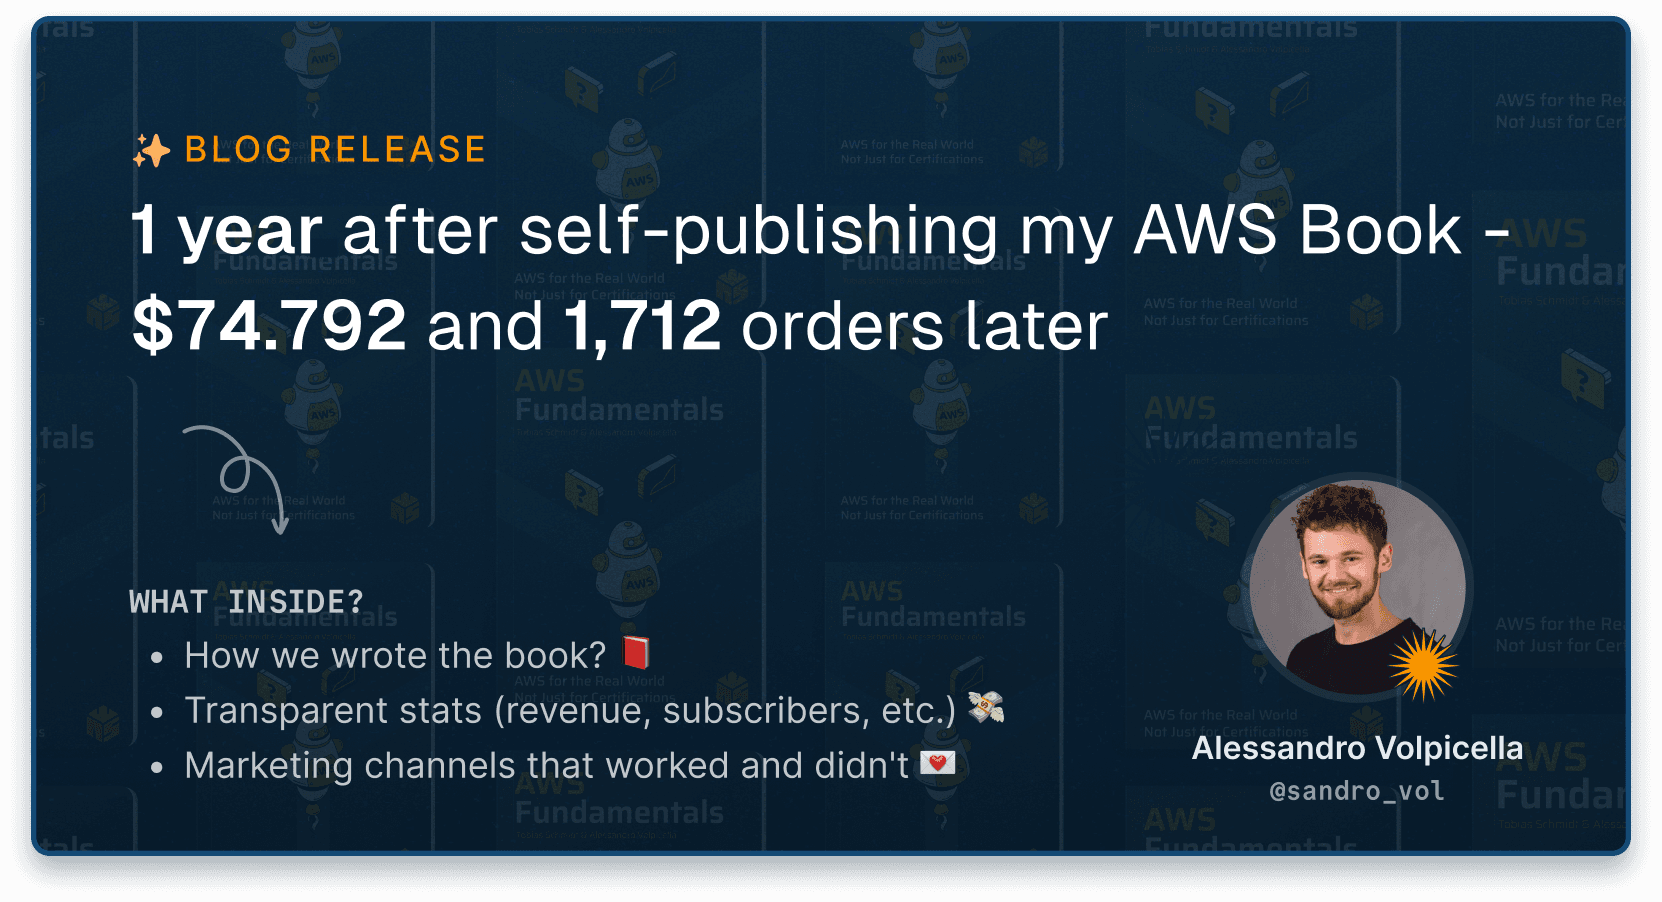 1 year after self-publishing an AWS Book - $74,792 and 1,712 orders later